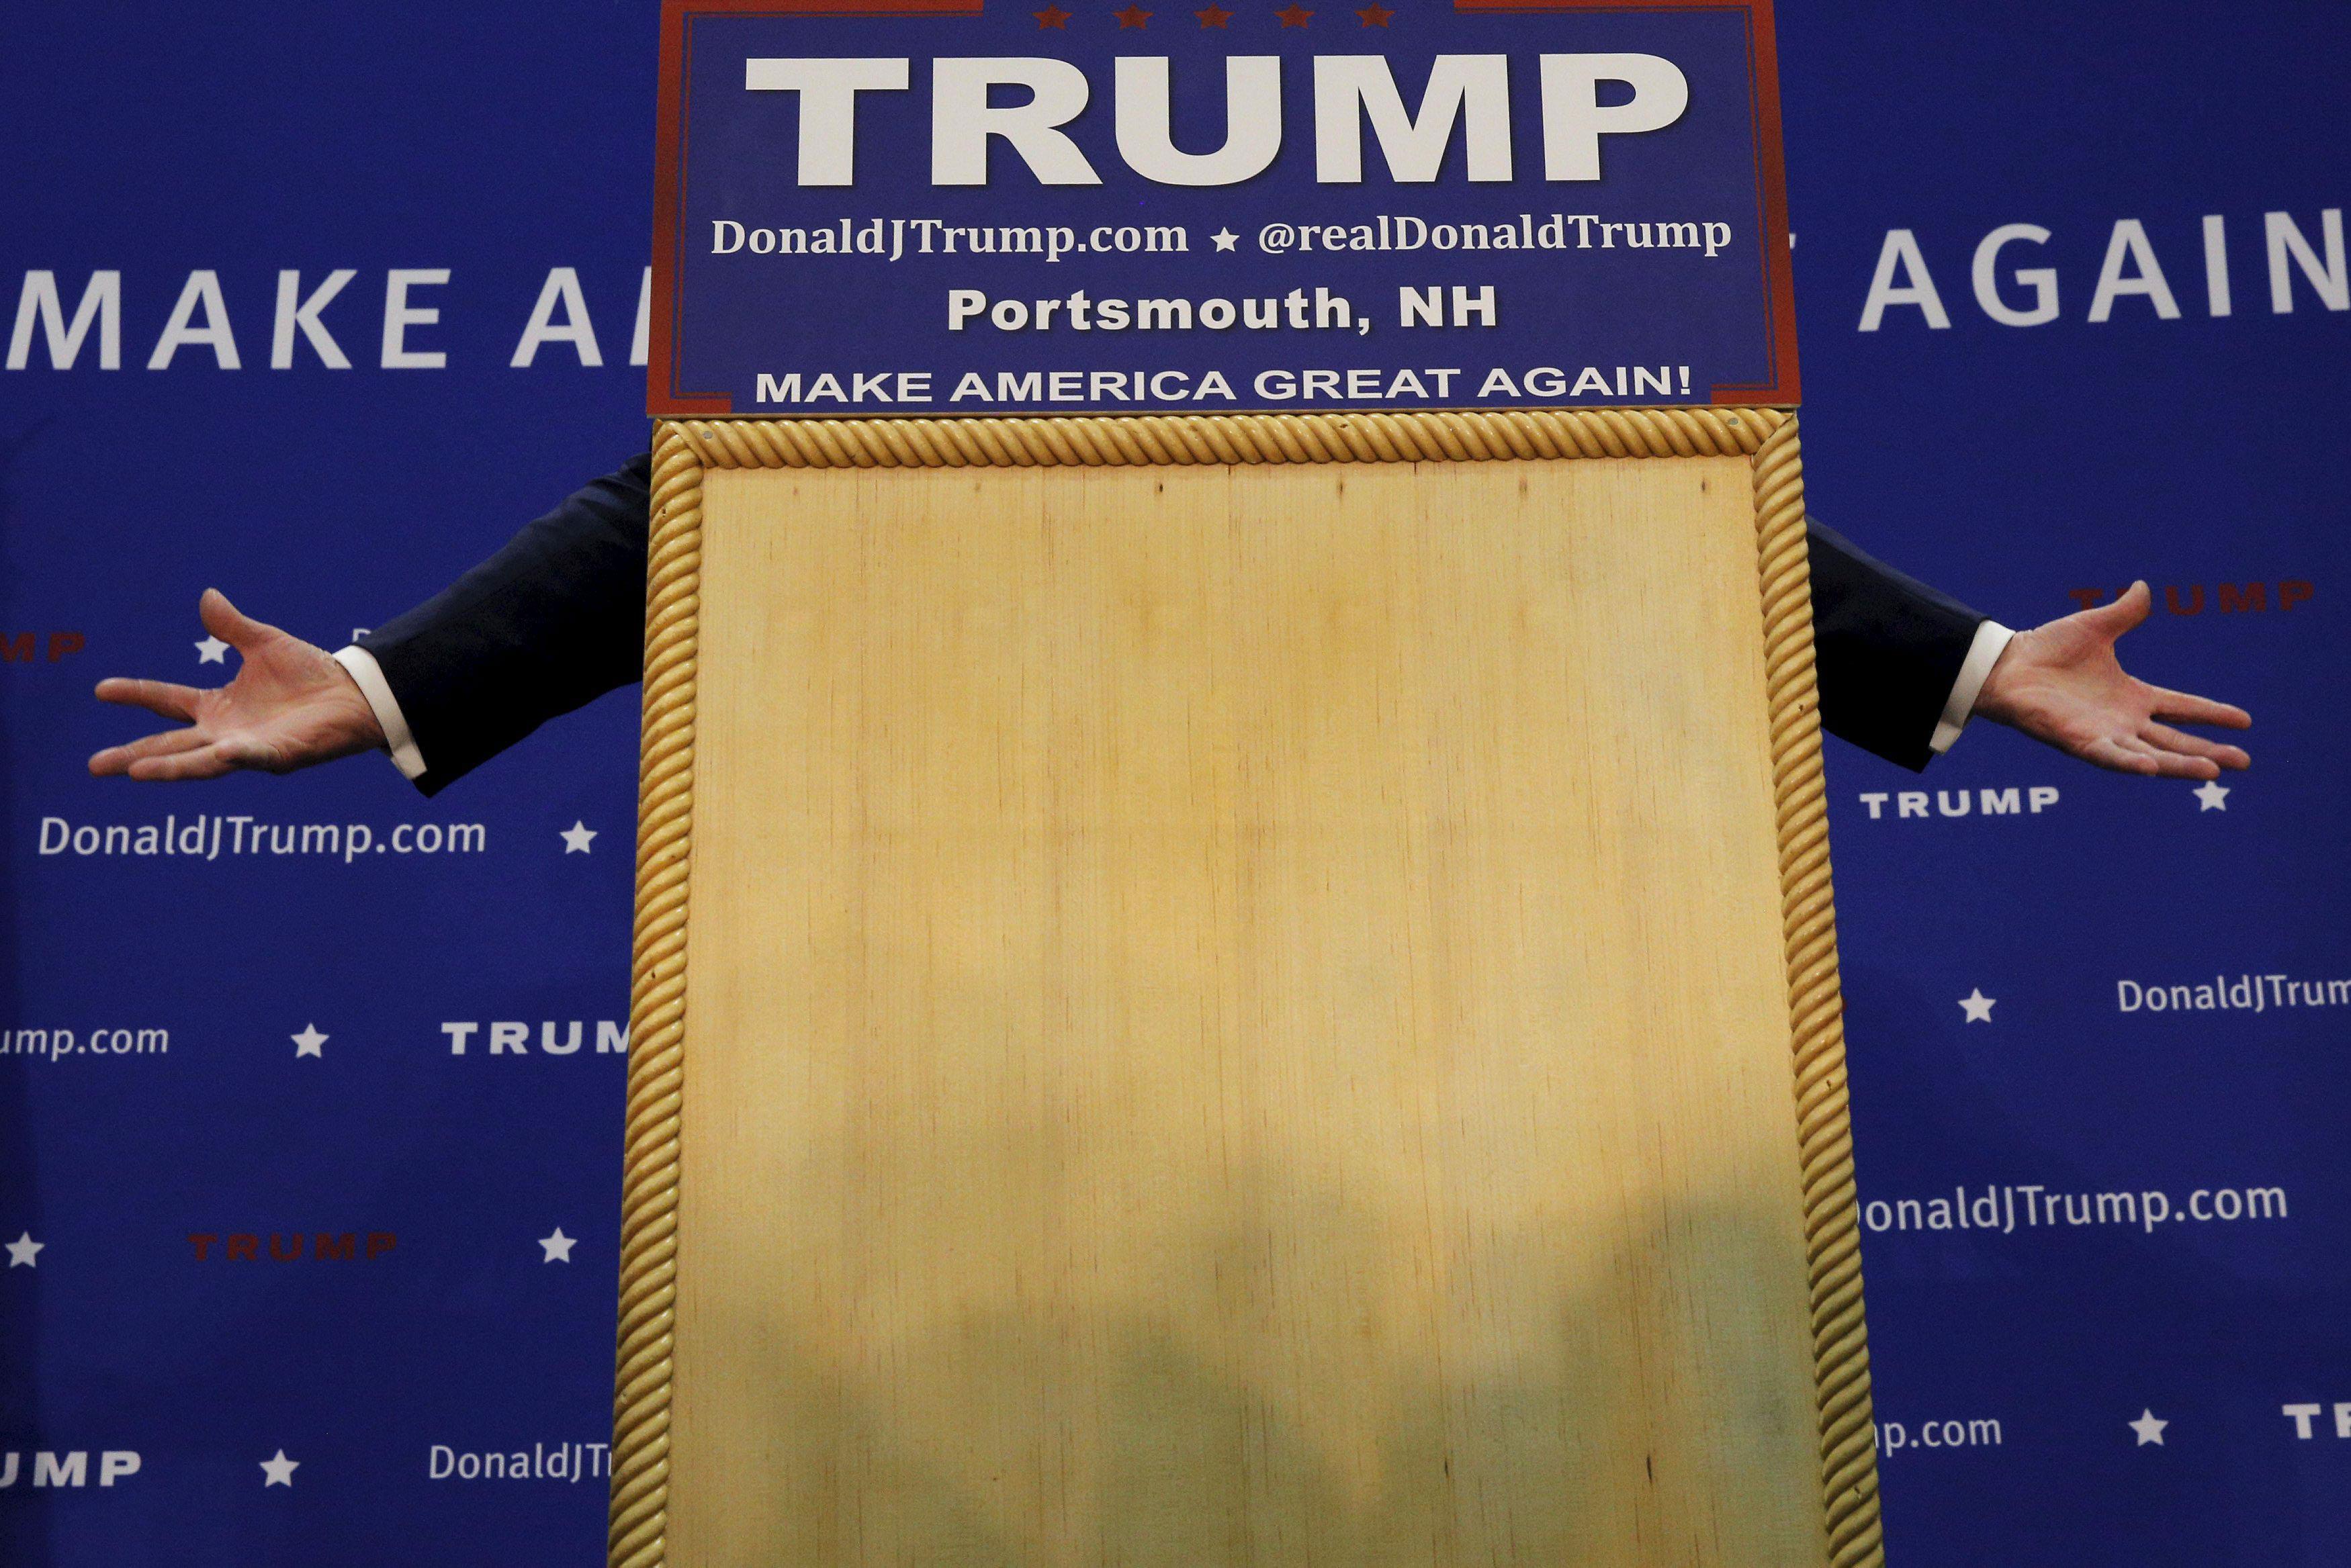 U.S. Republican presidential candidate Donald Trump speaks during a campaign rally in Portsmouth